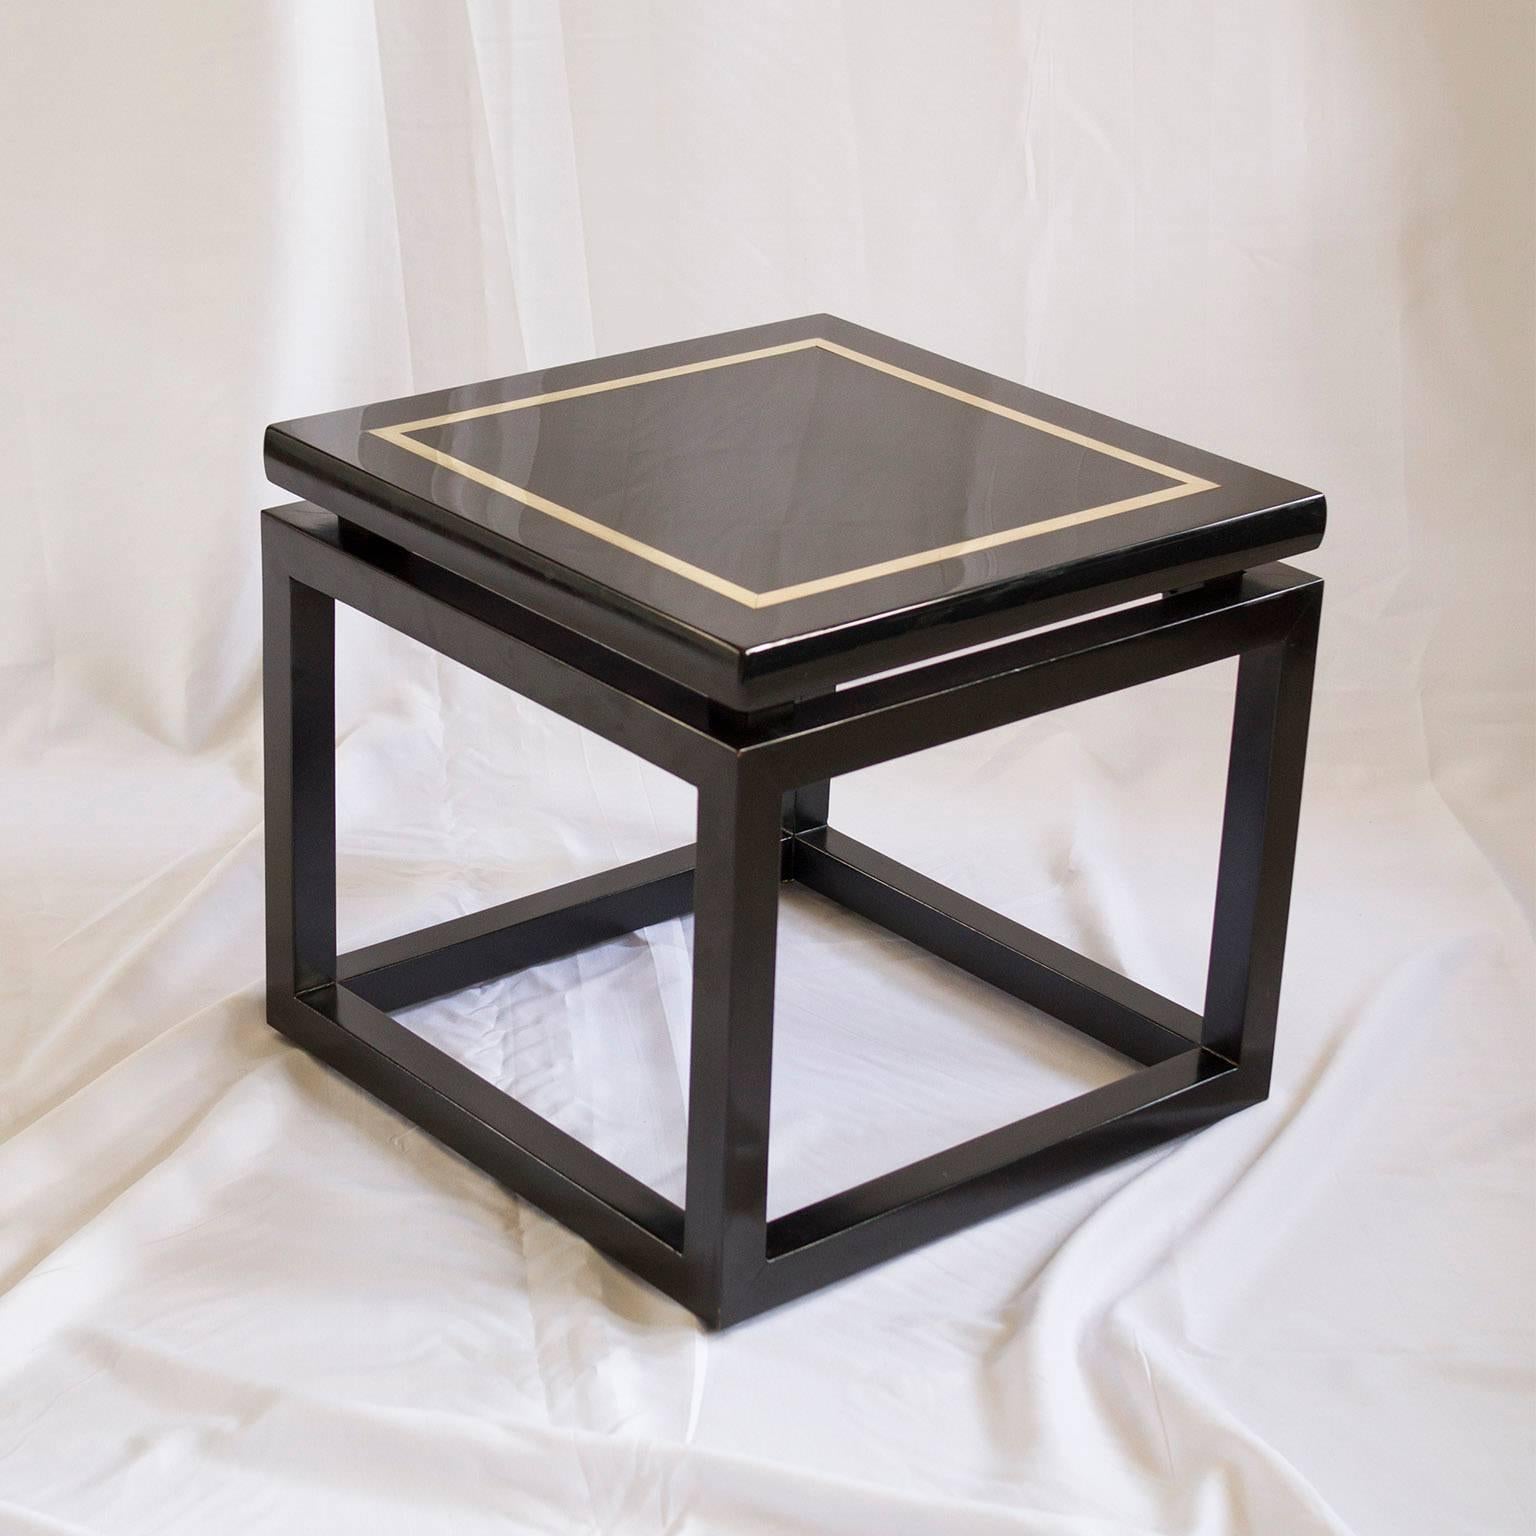 Late 20th Century Pair of Black Lacquer Side Tables